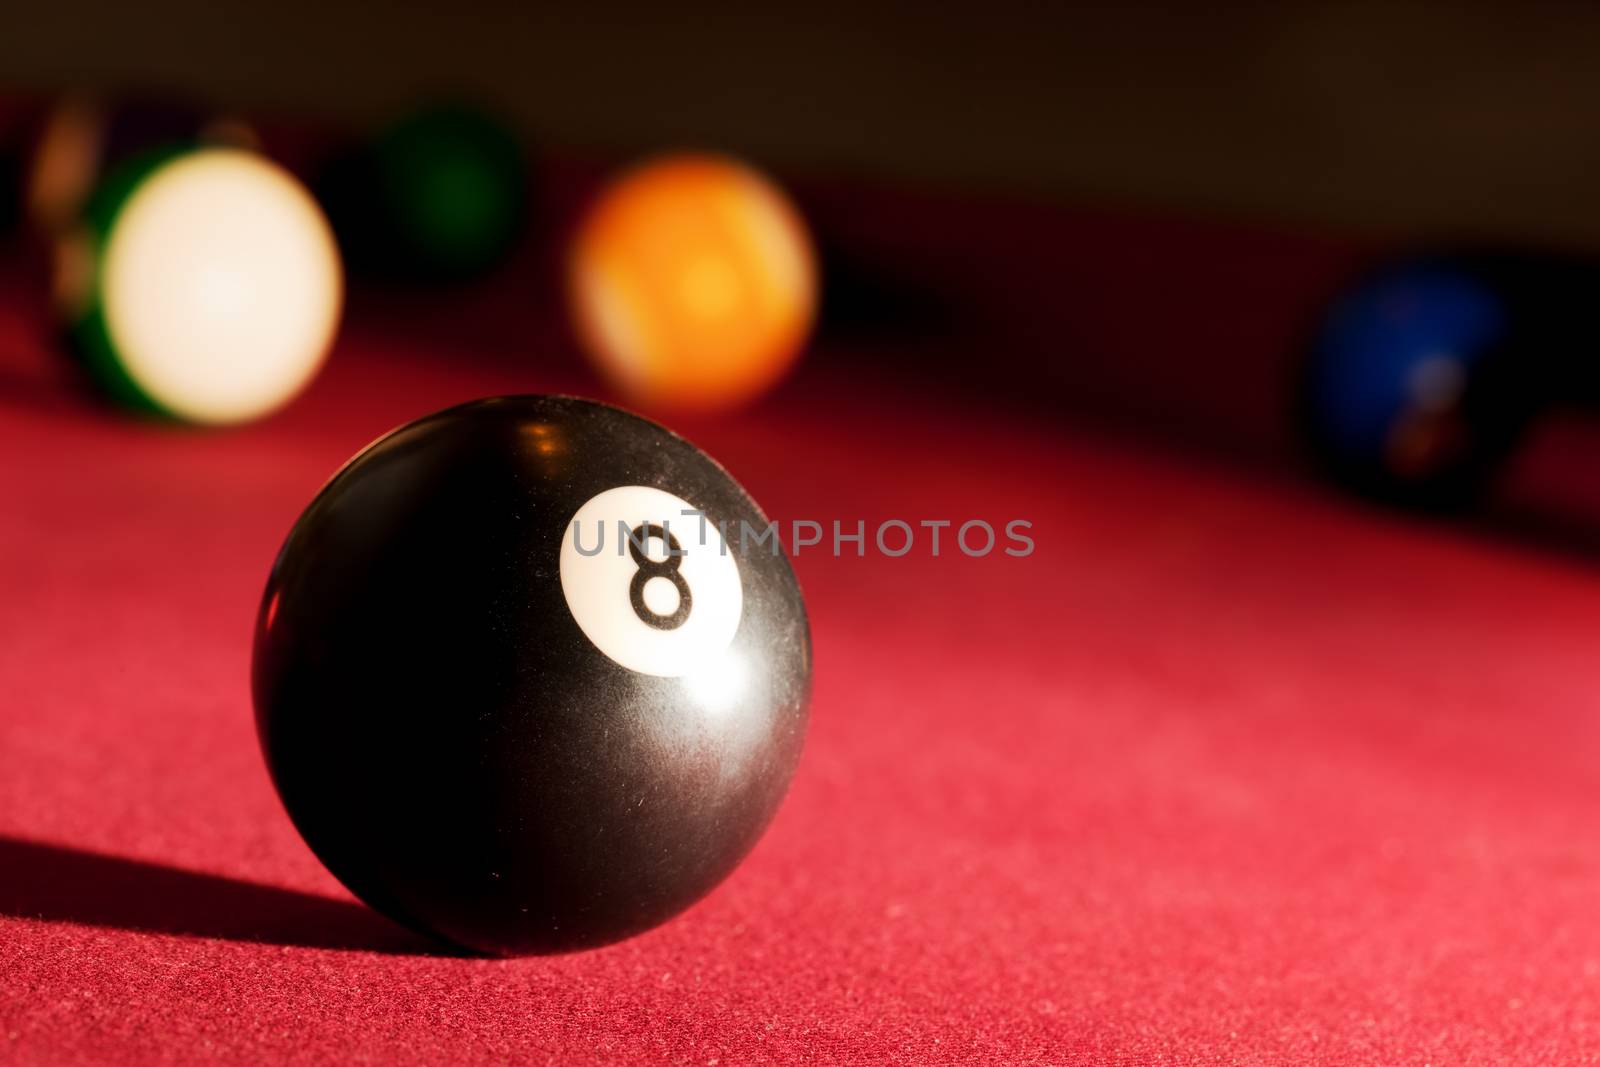 Billards pool or snooker game. The black eight ball. Red cloth table